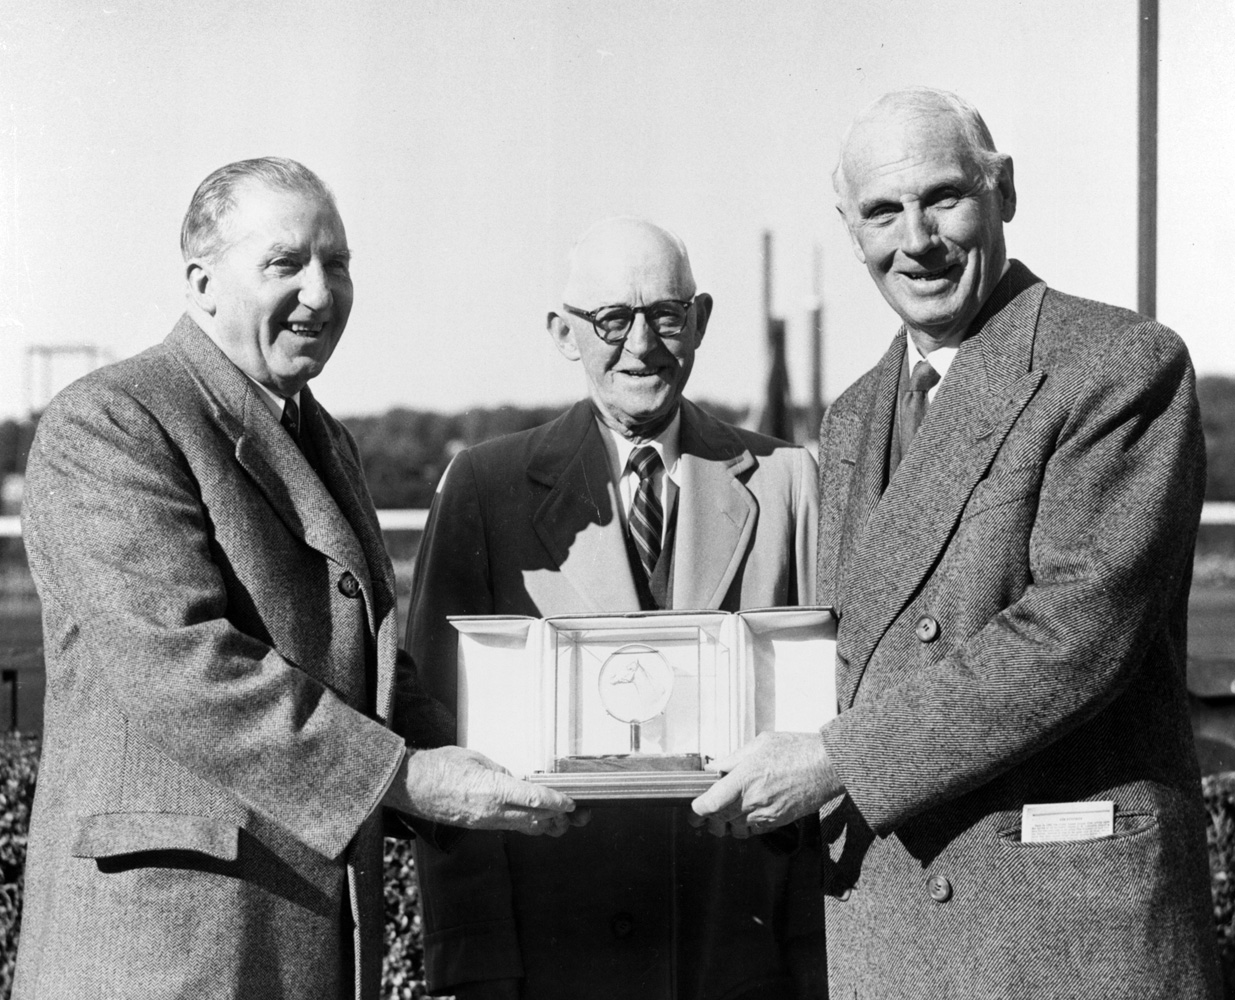 John W. Hanes, W. F. Bert Mulholland, and George D. Widener, Jr. at the trophy presentation for the 1957 Belmont Futurity, won by Jester (Keeneland Library Morgan Collection)